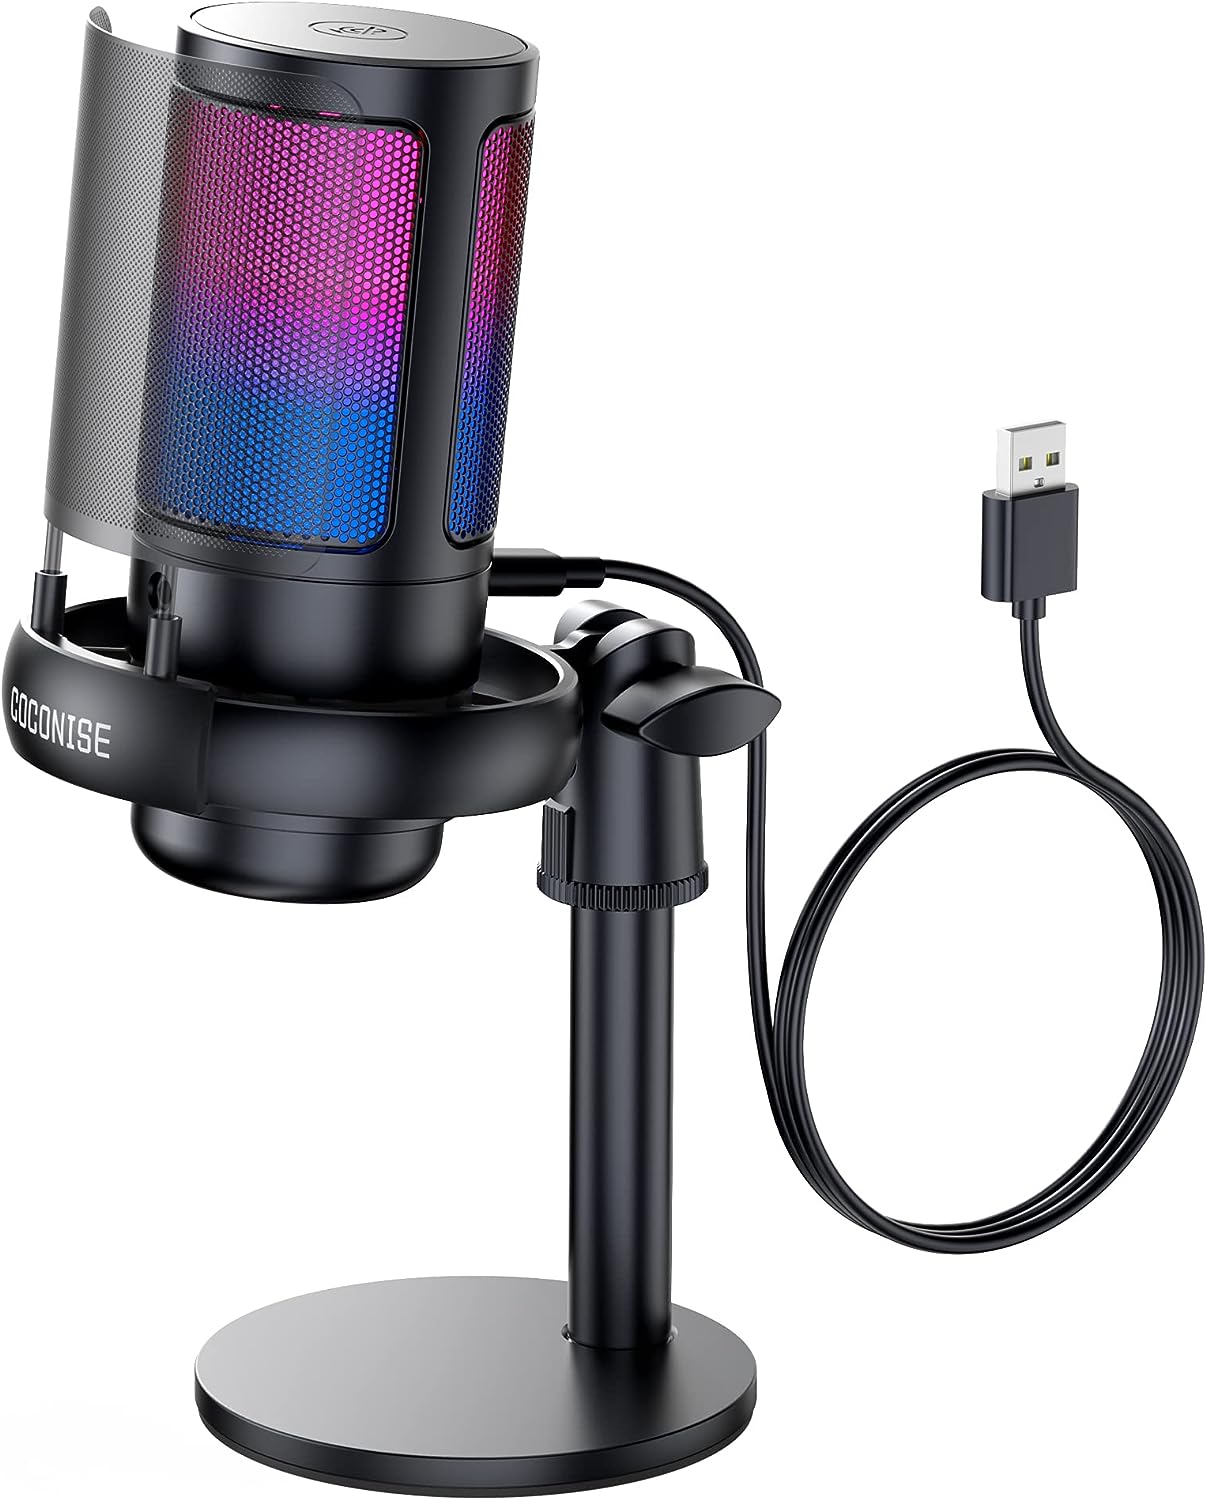 COCONISE Gaming Microphone, USB PC Mic for Podcasts Videos, Streaming, Condenser Mic with Quick Mute, Tripod Stand, Pop Filter, RGB Indicator, Shock Mount, Rotate gain button, Compatible with PS4/5/PC